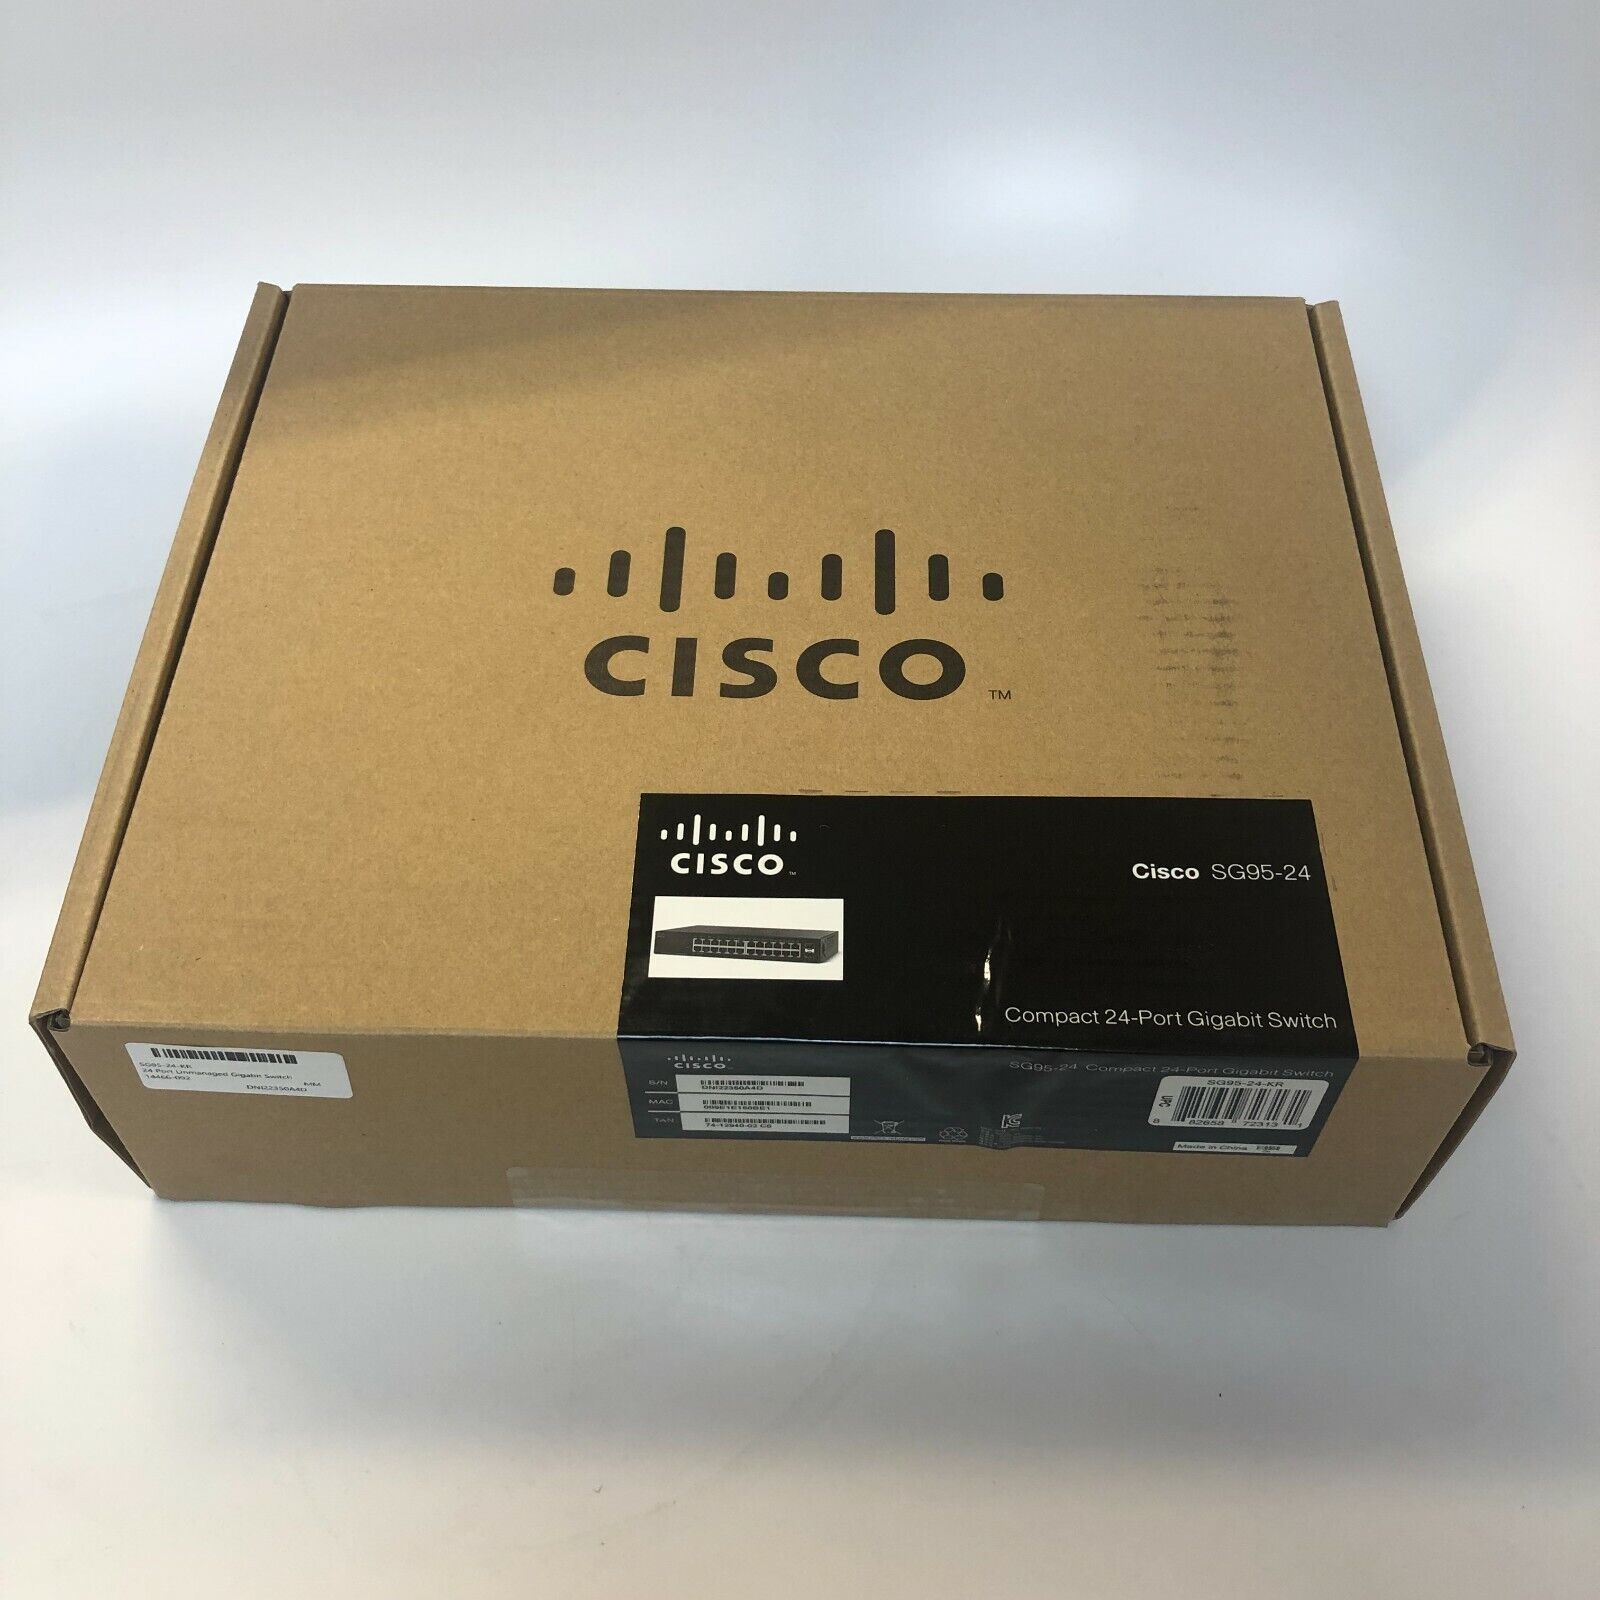 Cisco SG95-24 24-Port Compact Gigabit Switch - NEW, FACTORY SEALED